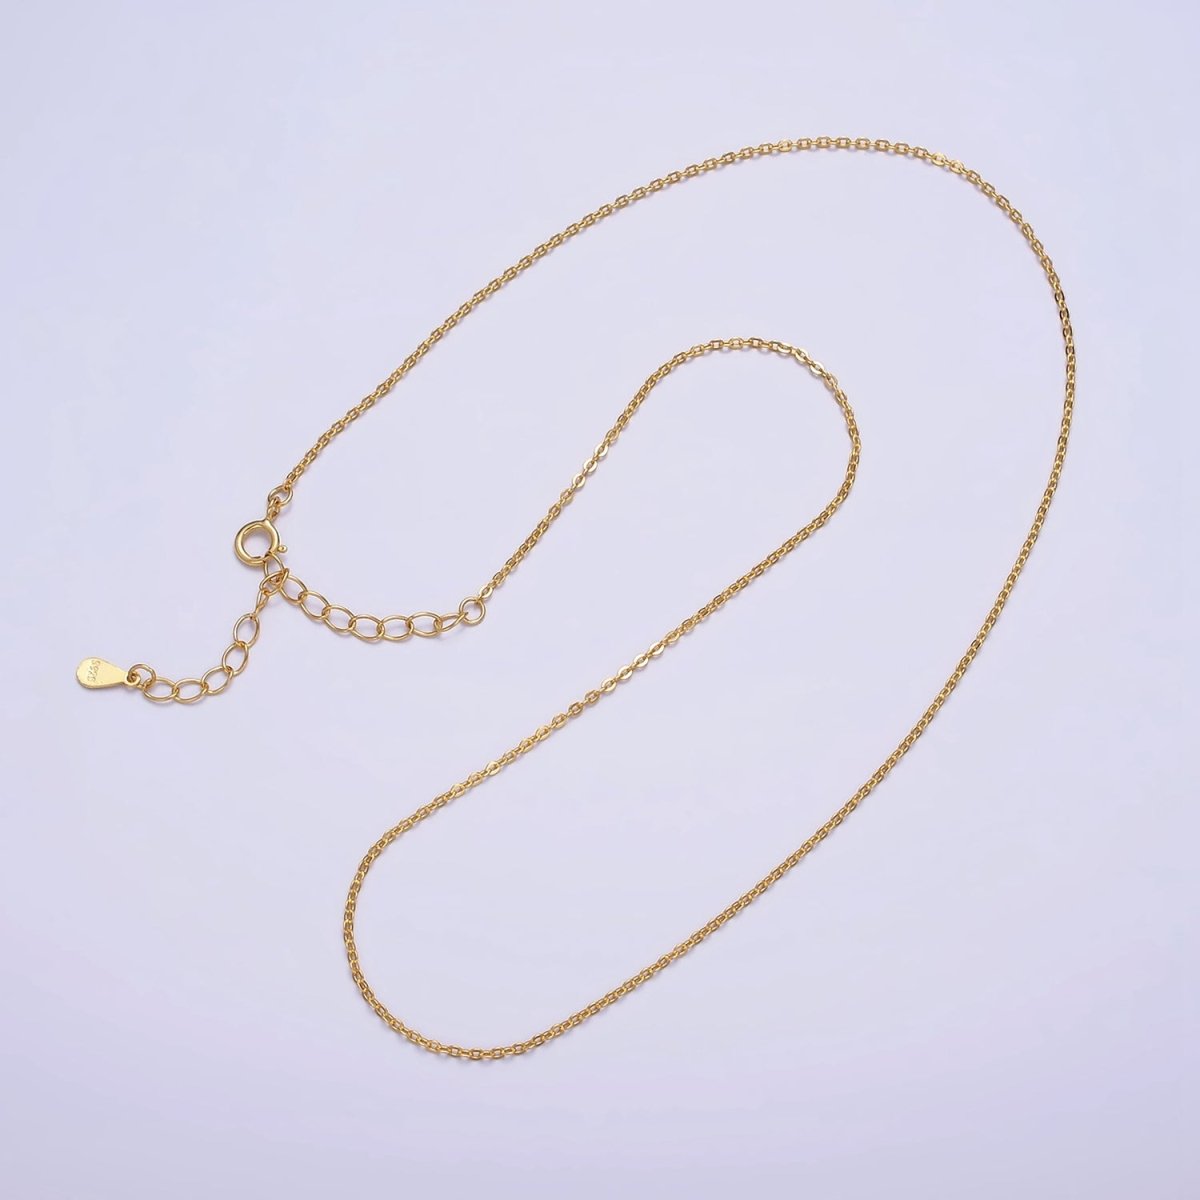 Dainty 24K Gold Vermeil Cable Chain Necklace 925 Sterling Silver Necklace Chain w/ Heavy 24K Gold Plated 15.35 inch + 2 inch extender | WA-1979 Clearance Pricing - DLUXCA